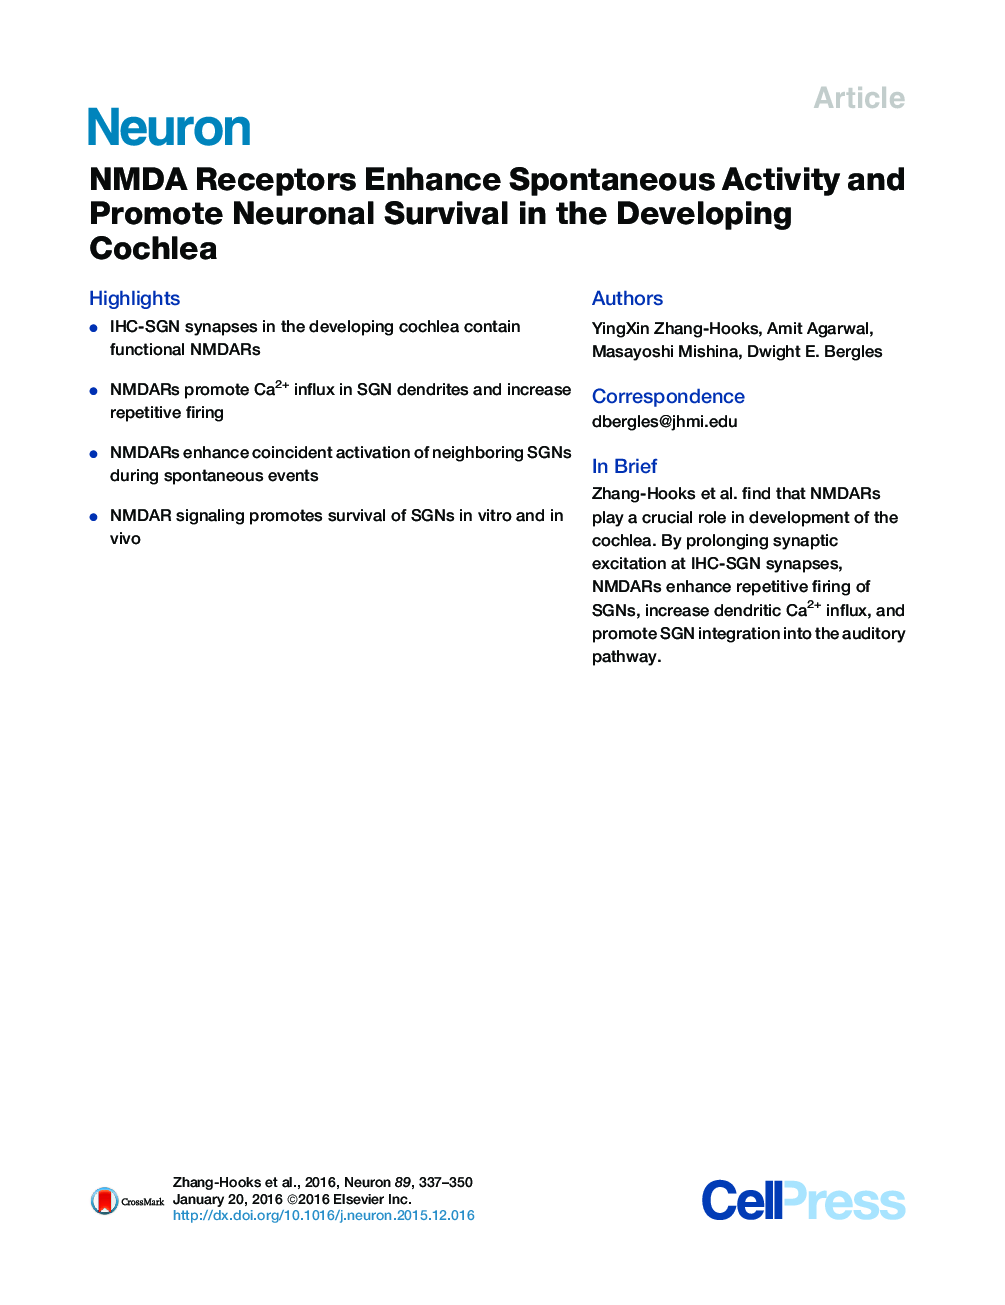 NMDA Receptors Enhance Spontaneous Activity and Promote Neuronal Survival in the Developing Cochlea